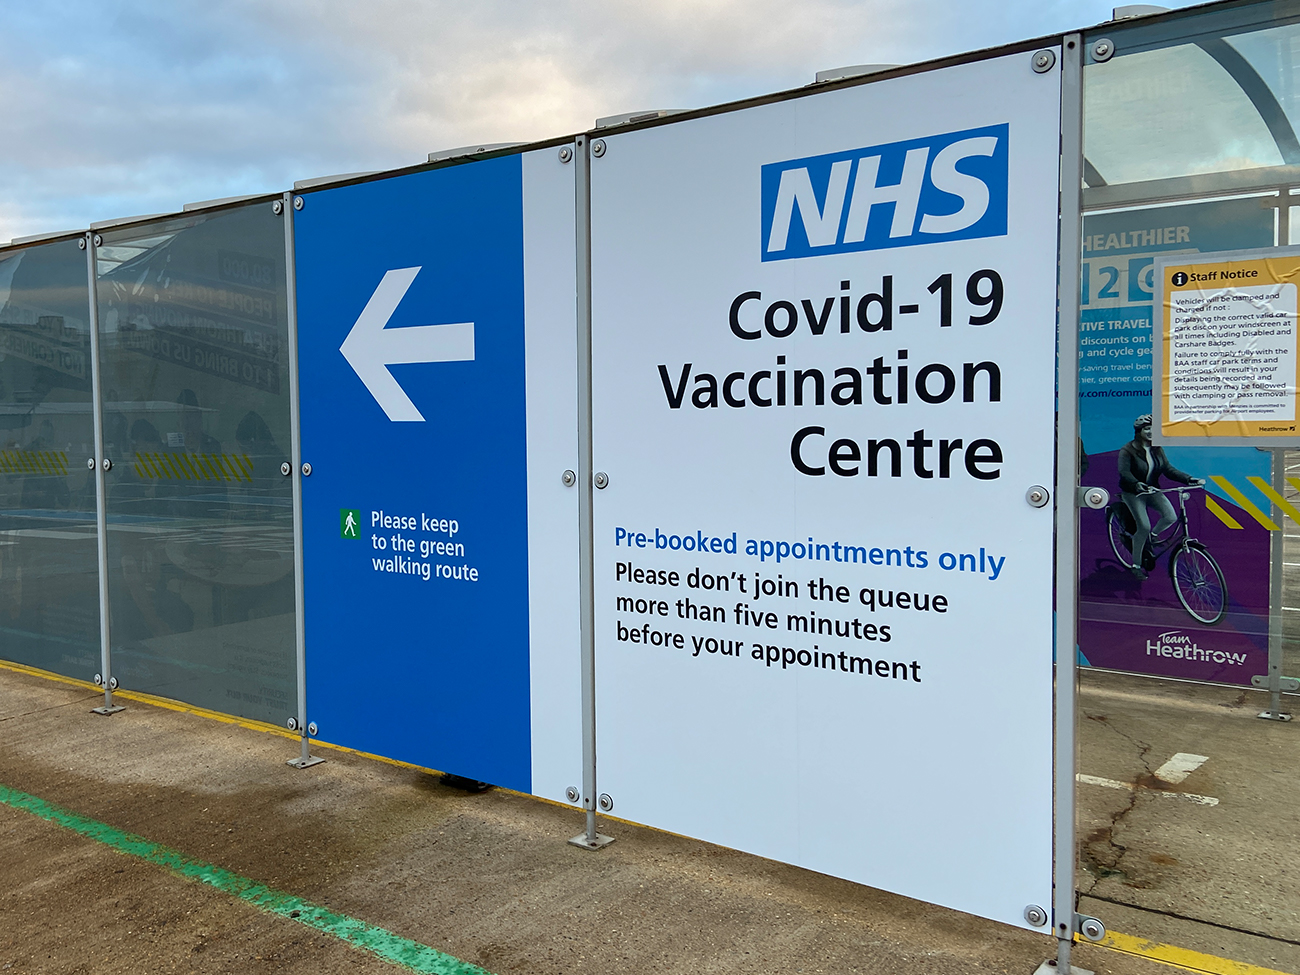 NHS Vaccination Centre Bus Shelter signage